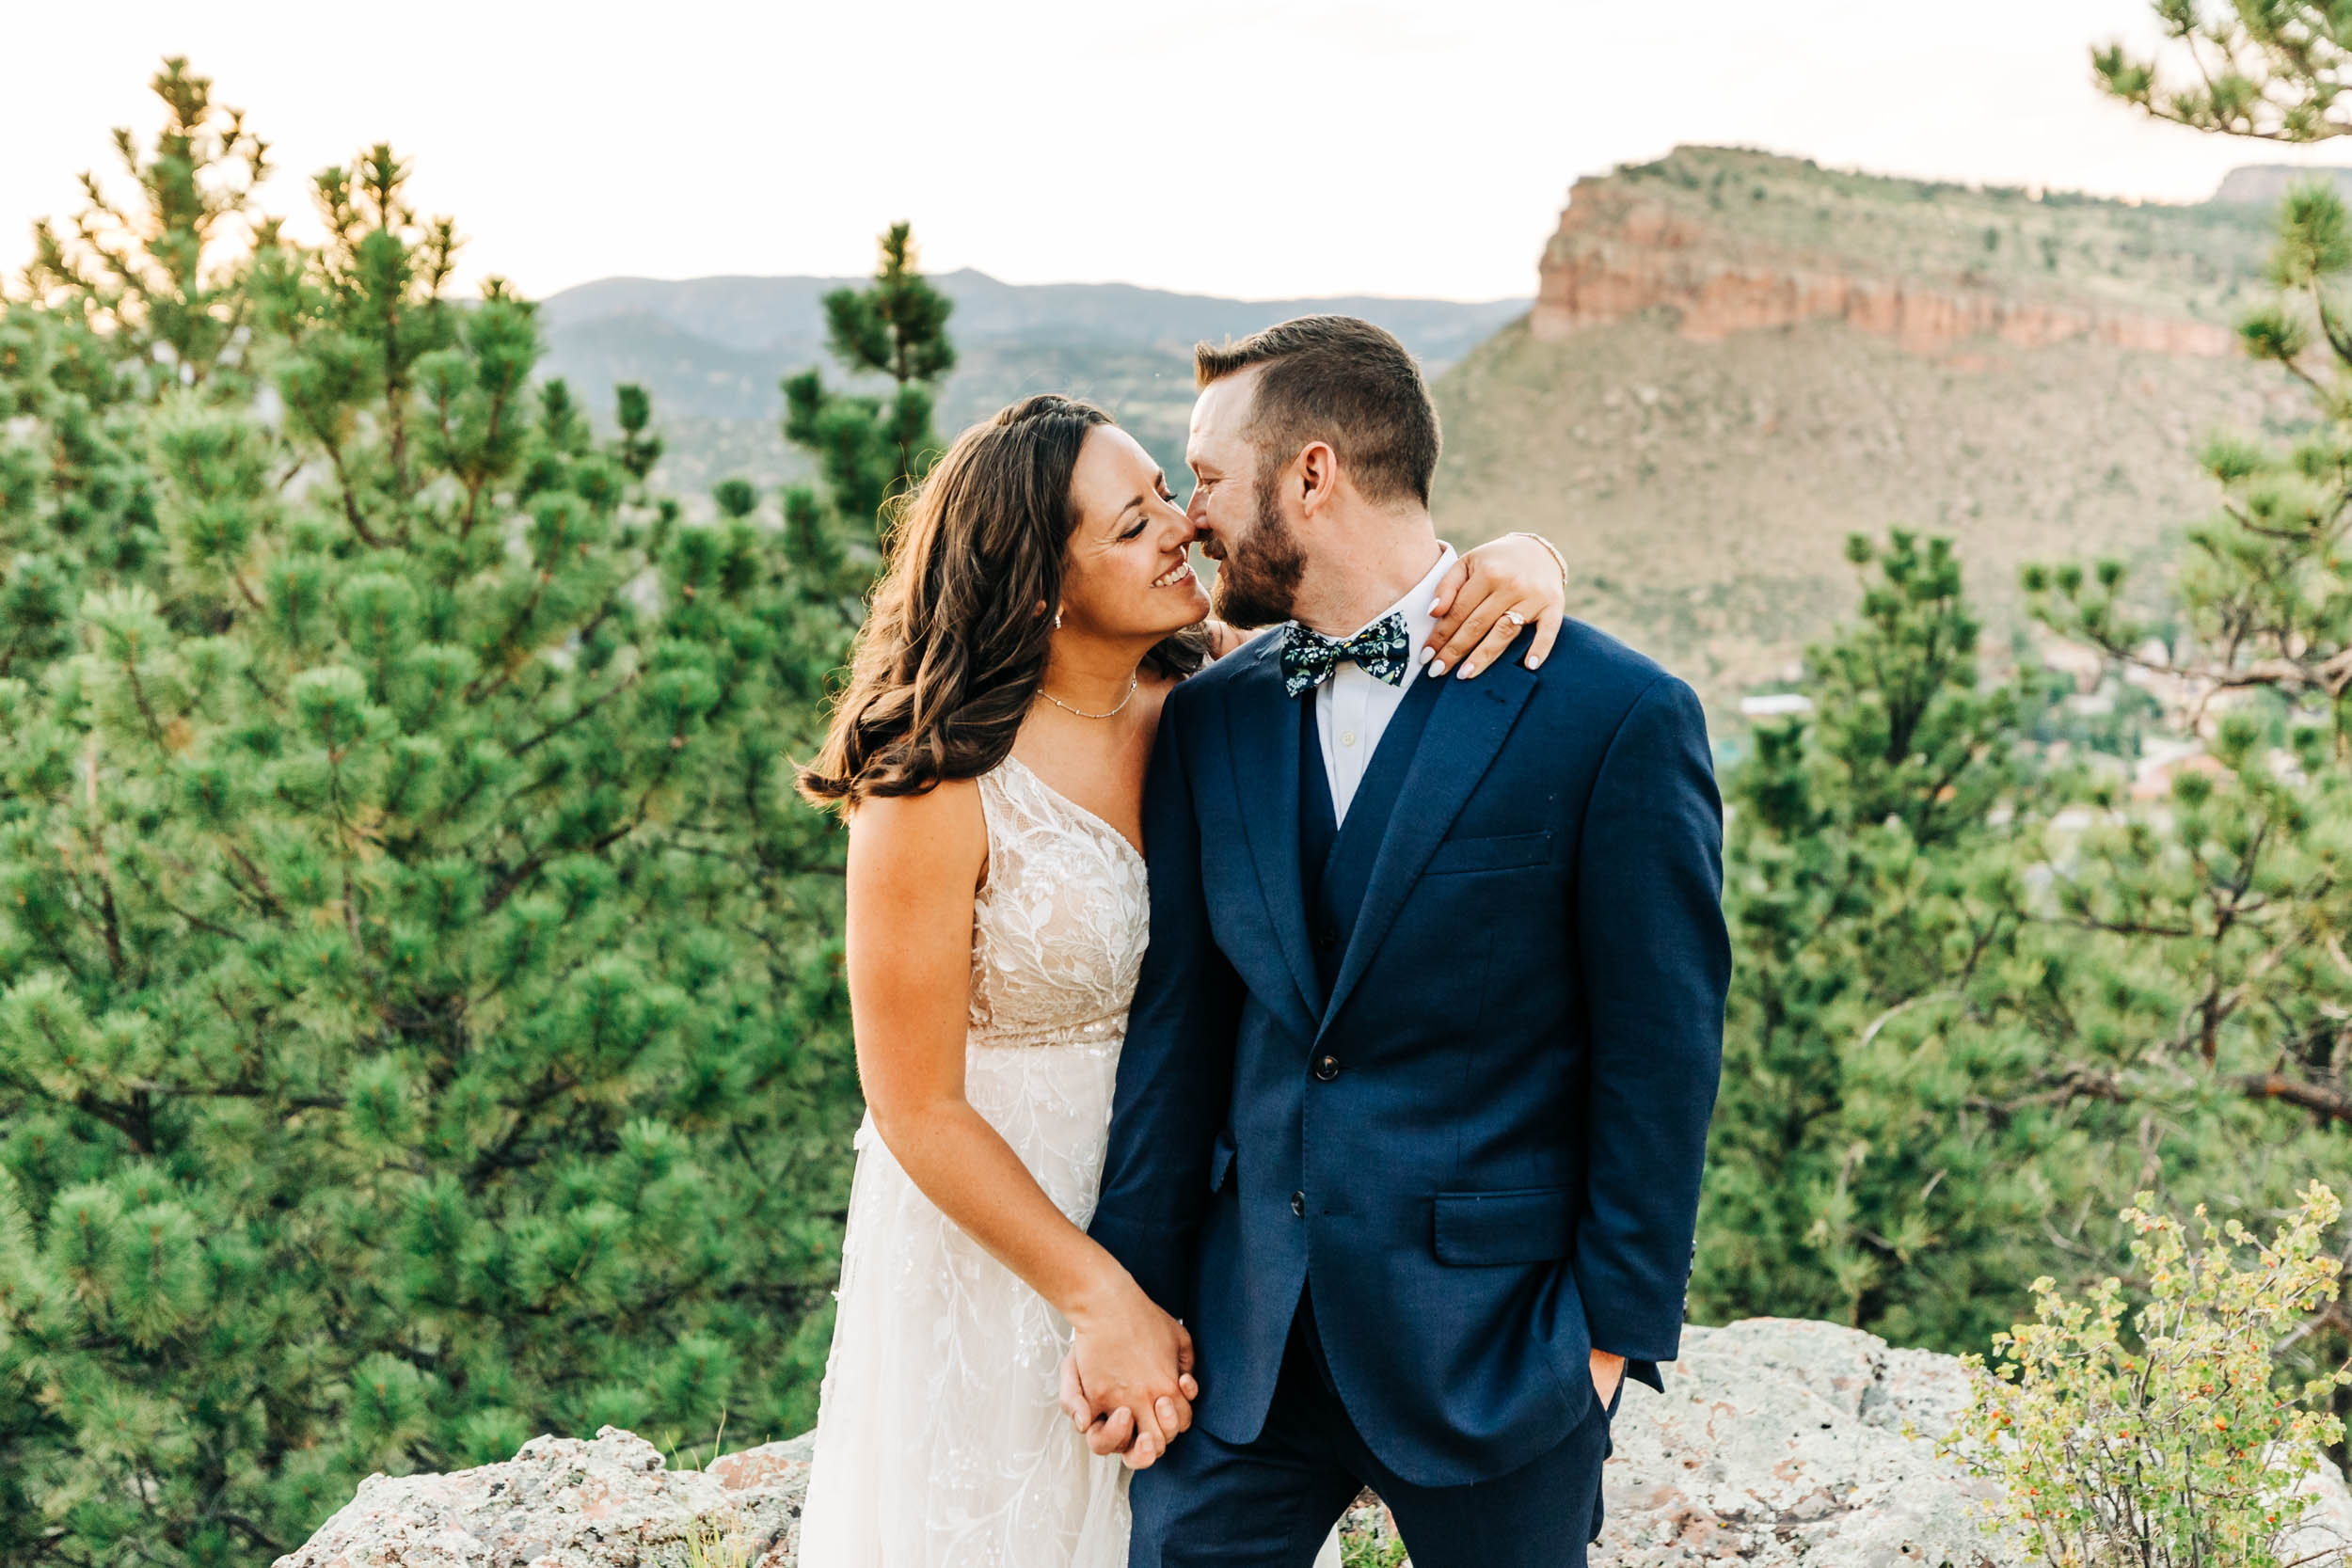 Sunset portraits at Lionscrest Manor in Colorado